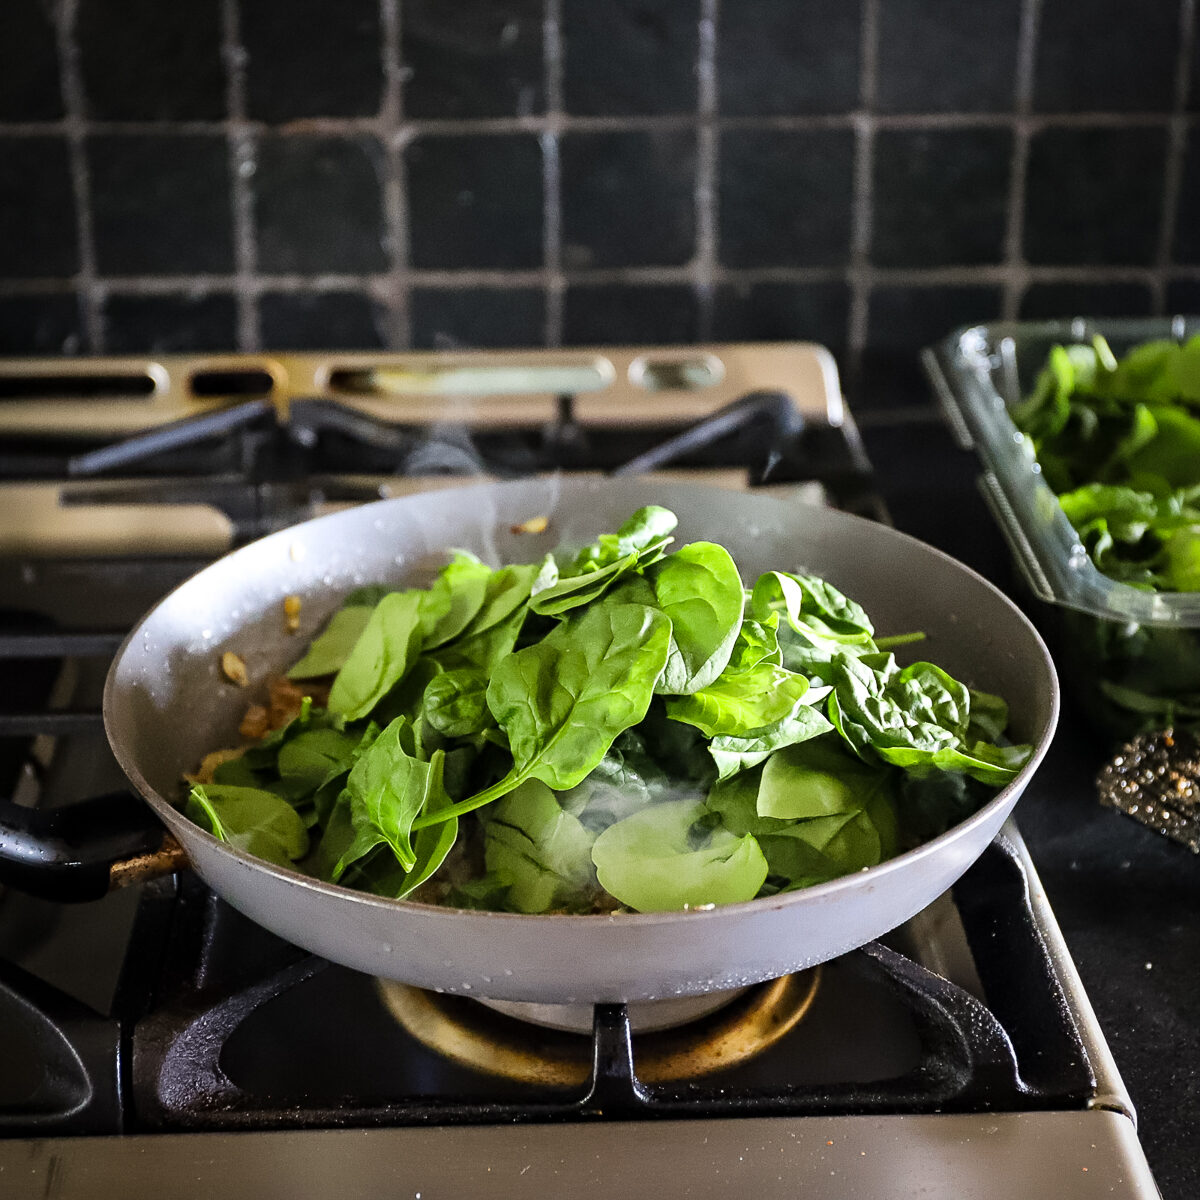 A heap of fresh baby spinach is added onto the pan of cooked onion. It is not all of the spinach, it is about ⅓ of it.